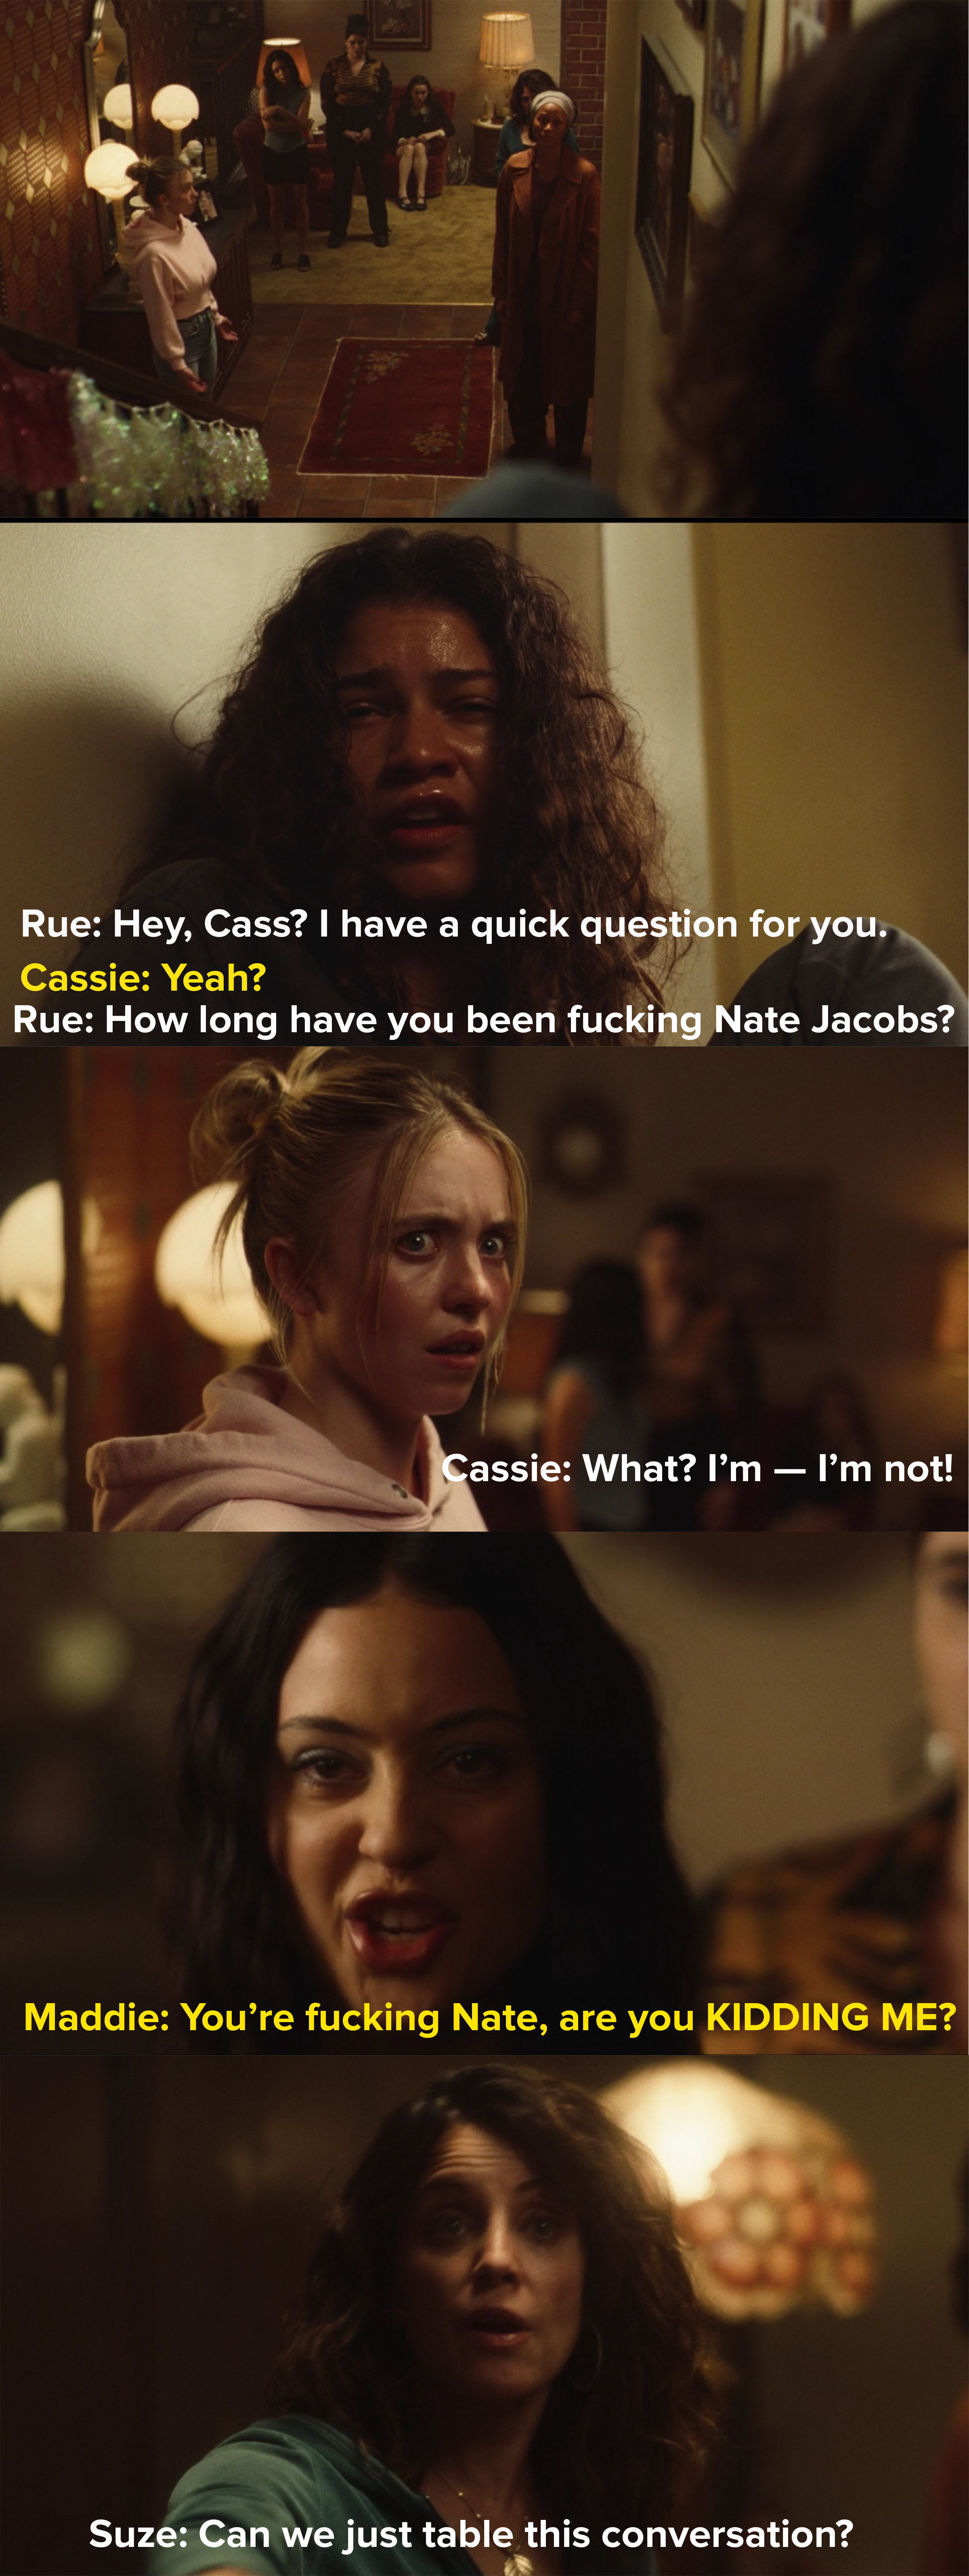 Rue&#x27;s mom wants to have an intervention for Rue, but Rue decides to take down Cassie instead by asking her in front of Maddie and everyone, &quot;How long have you been fucking Nate Jacobs?&quot;